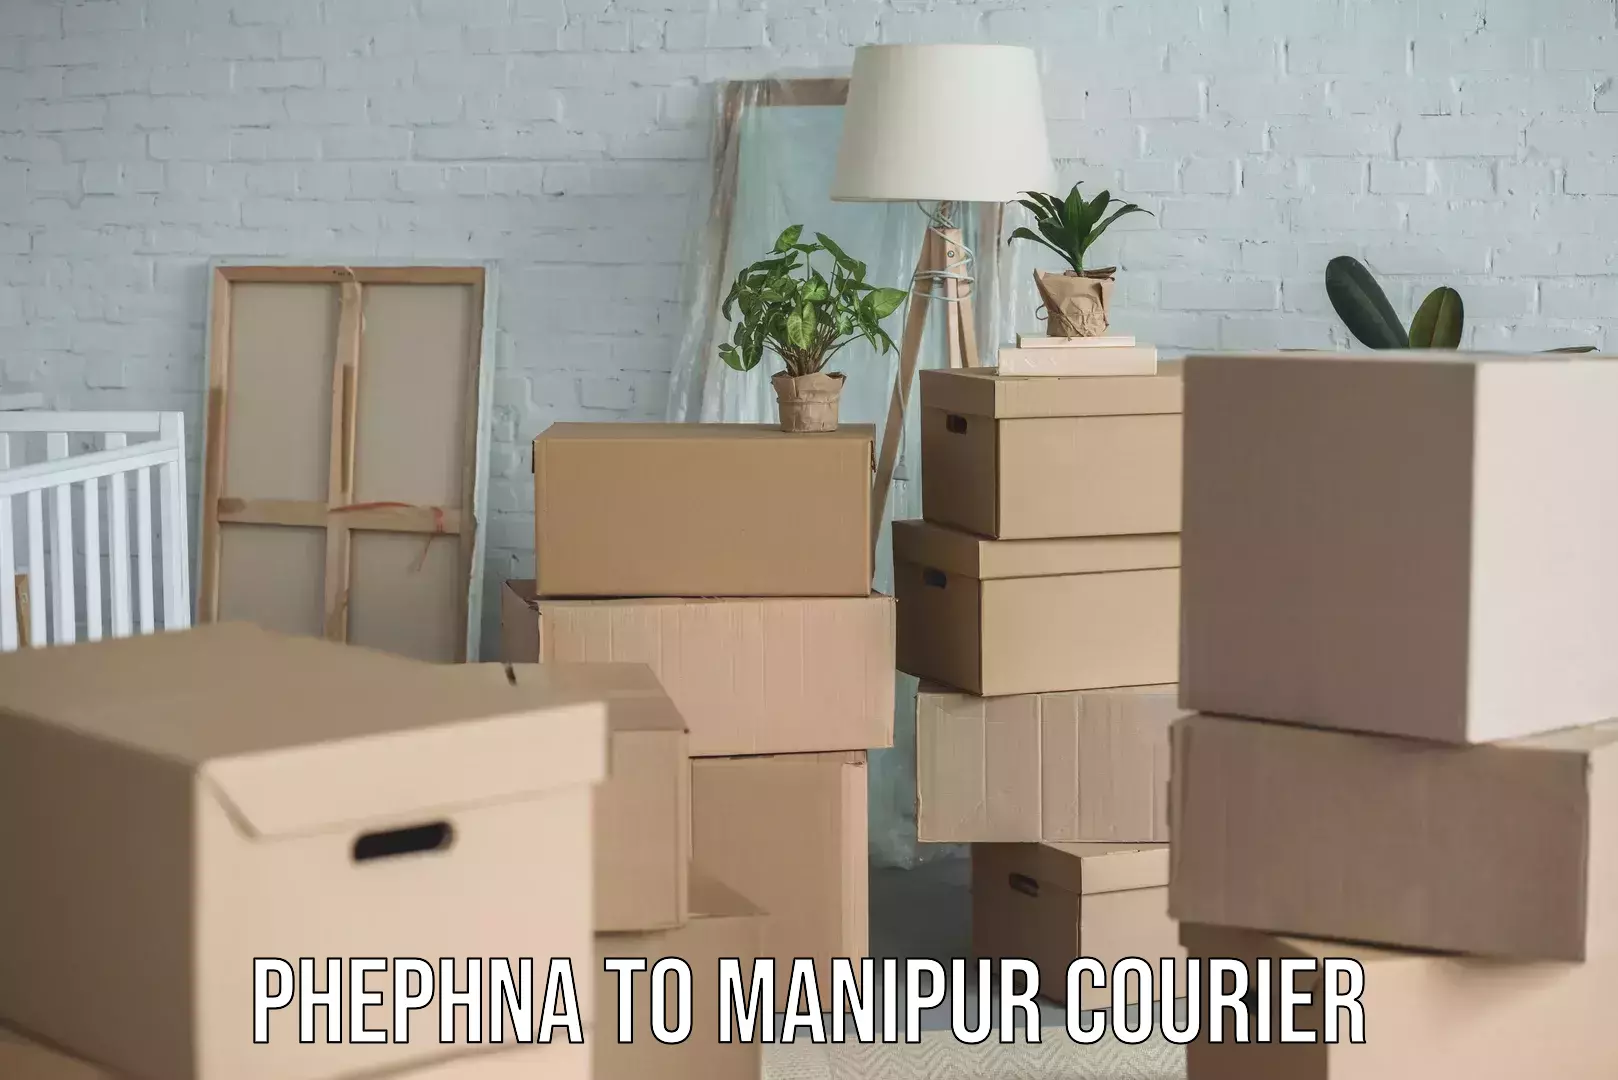 Furniture moving experts Phephna to Manipur